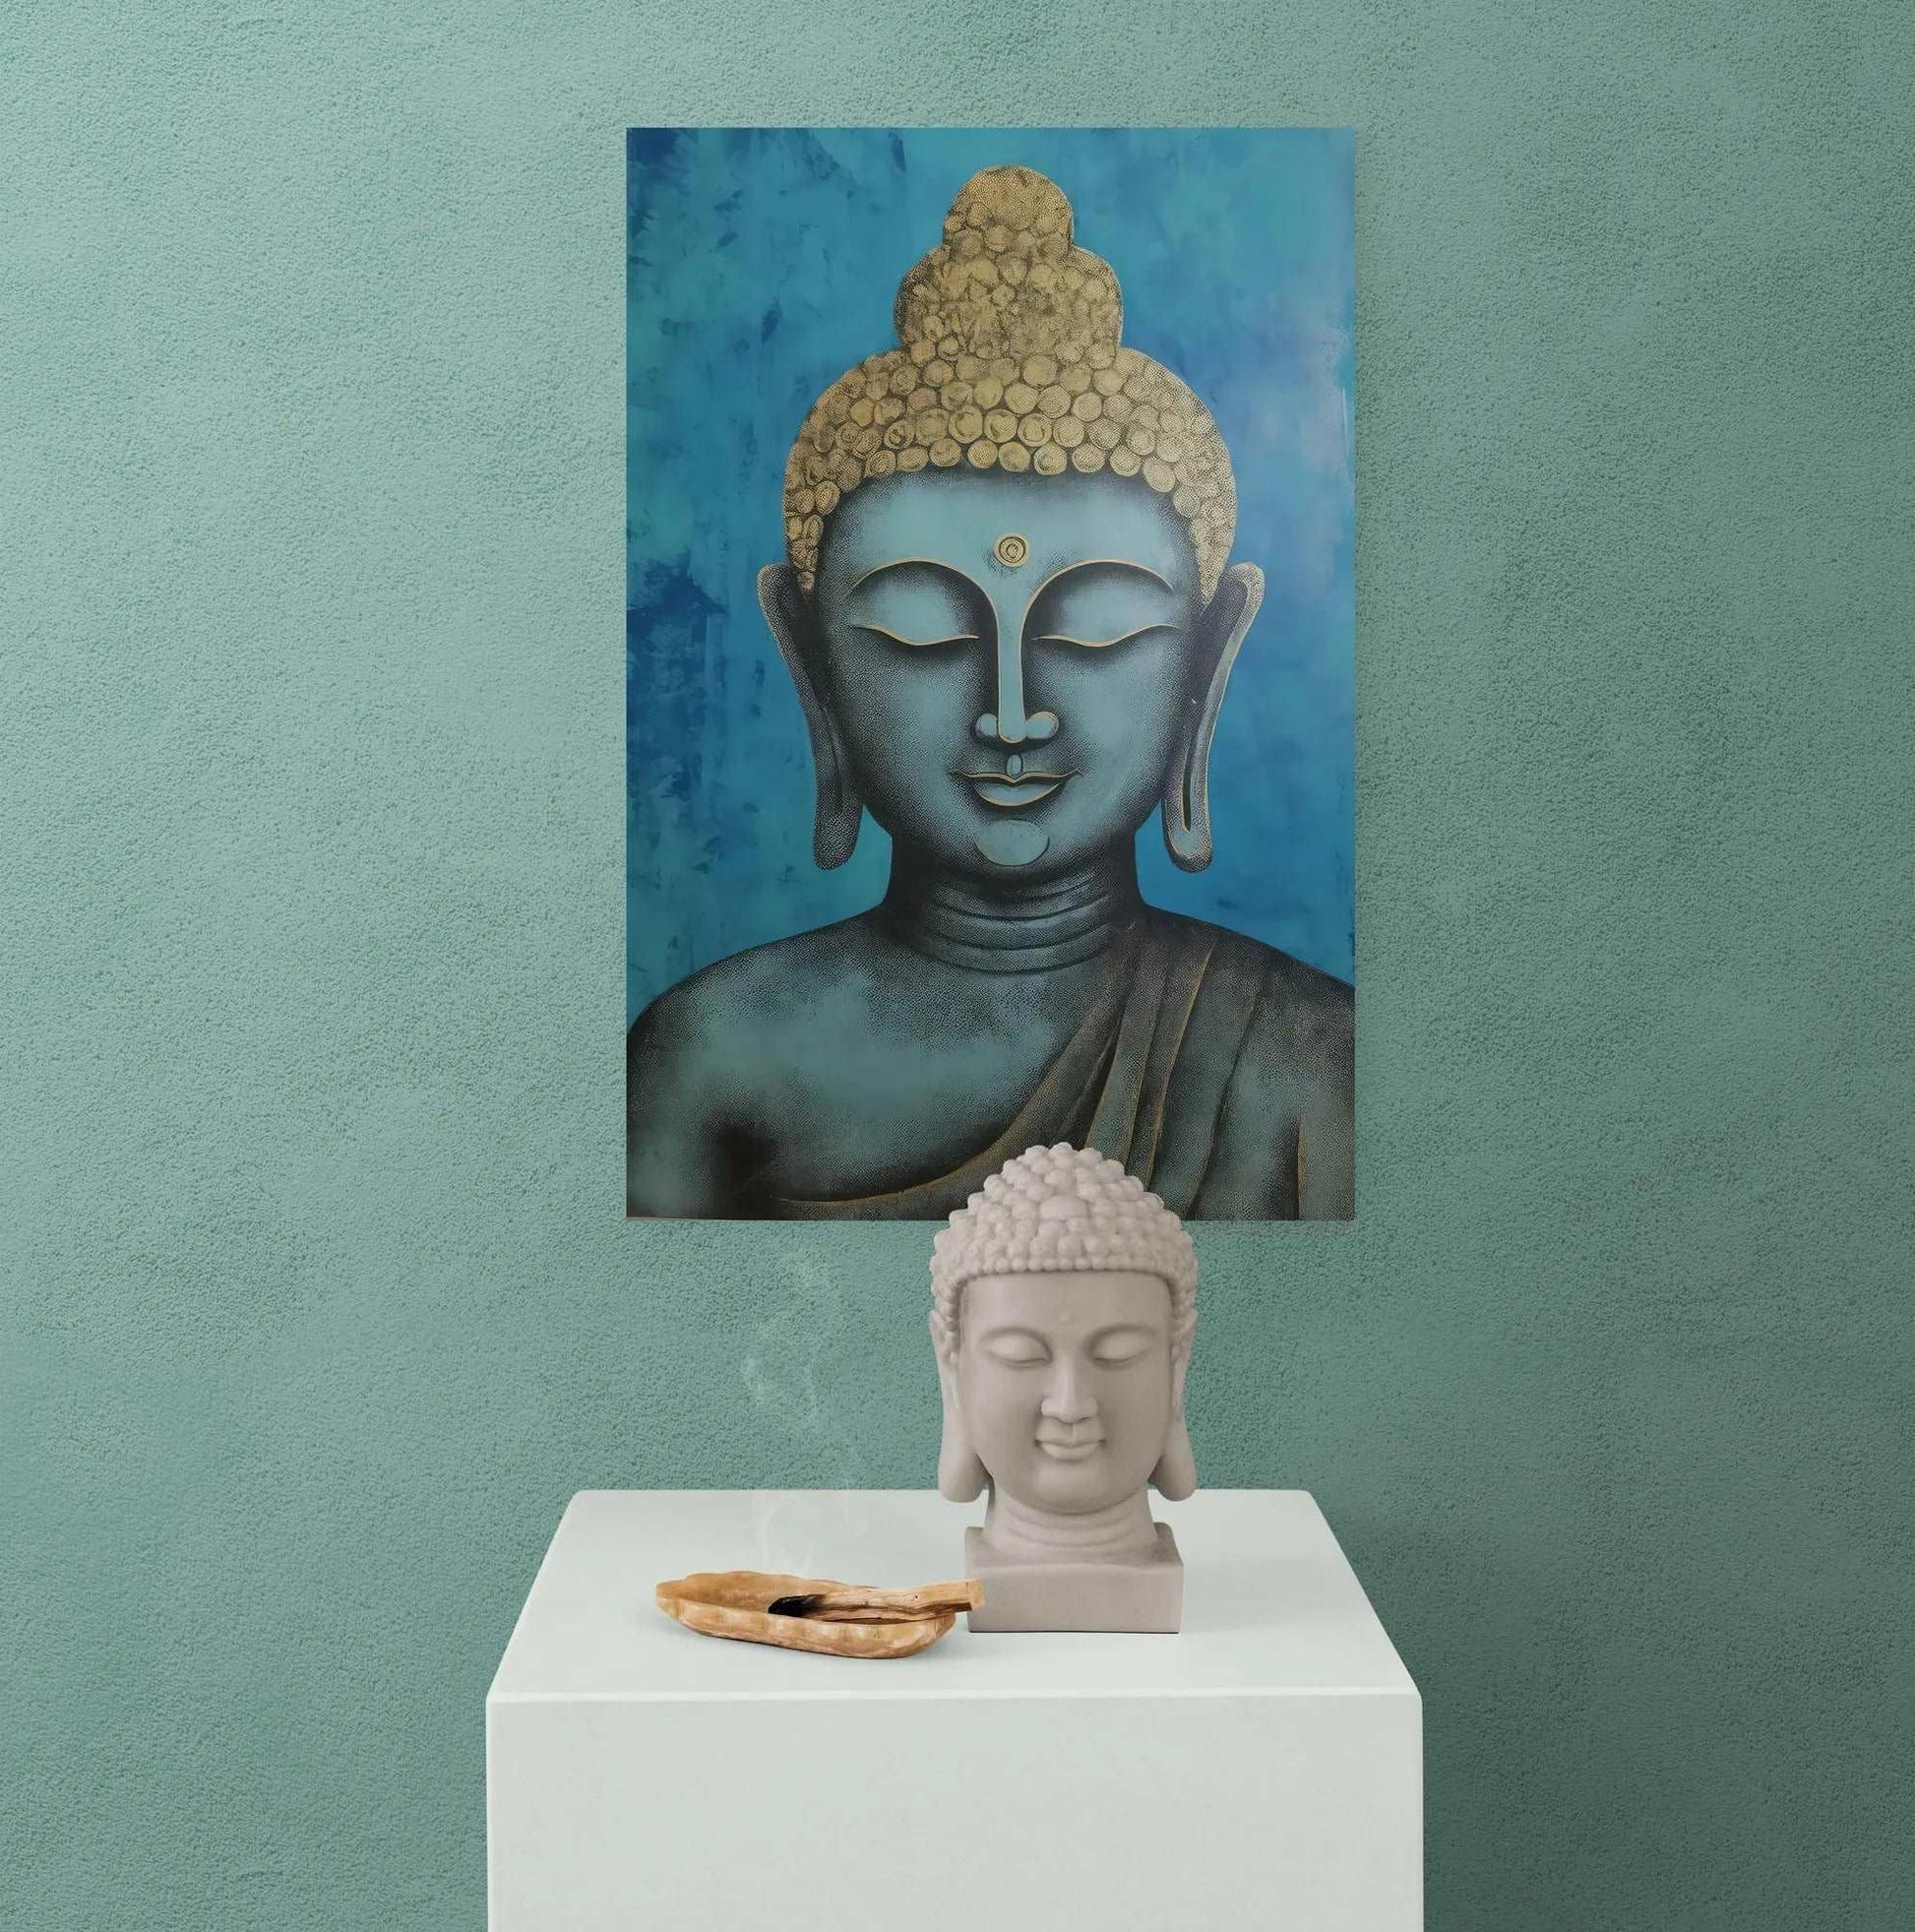 Buddha head statue on a white pedestal with palo santo sticks, against a teal wall with a blue and gold Buddha head painting.